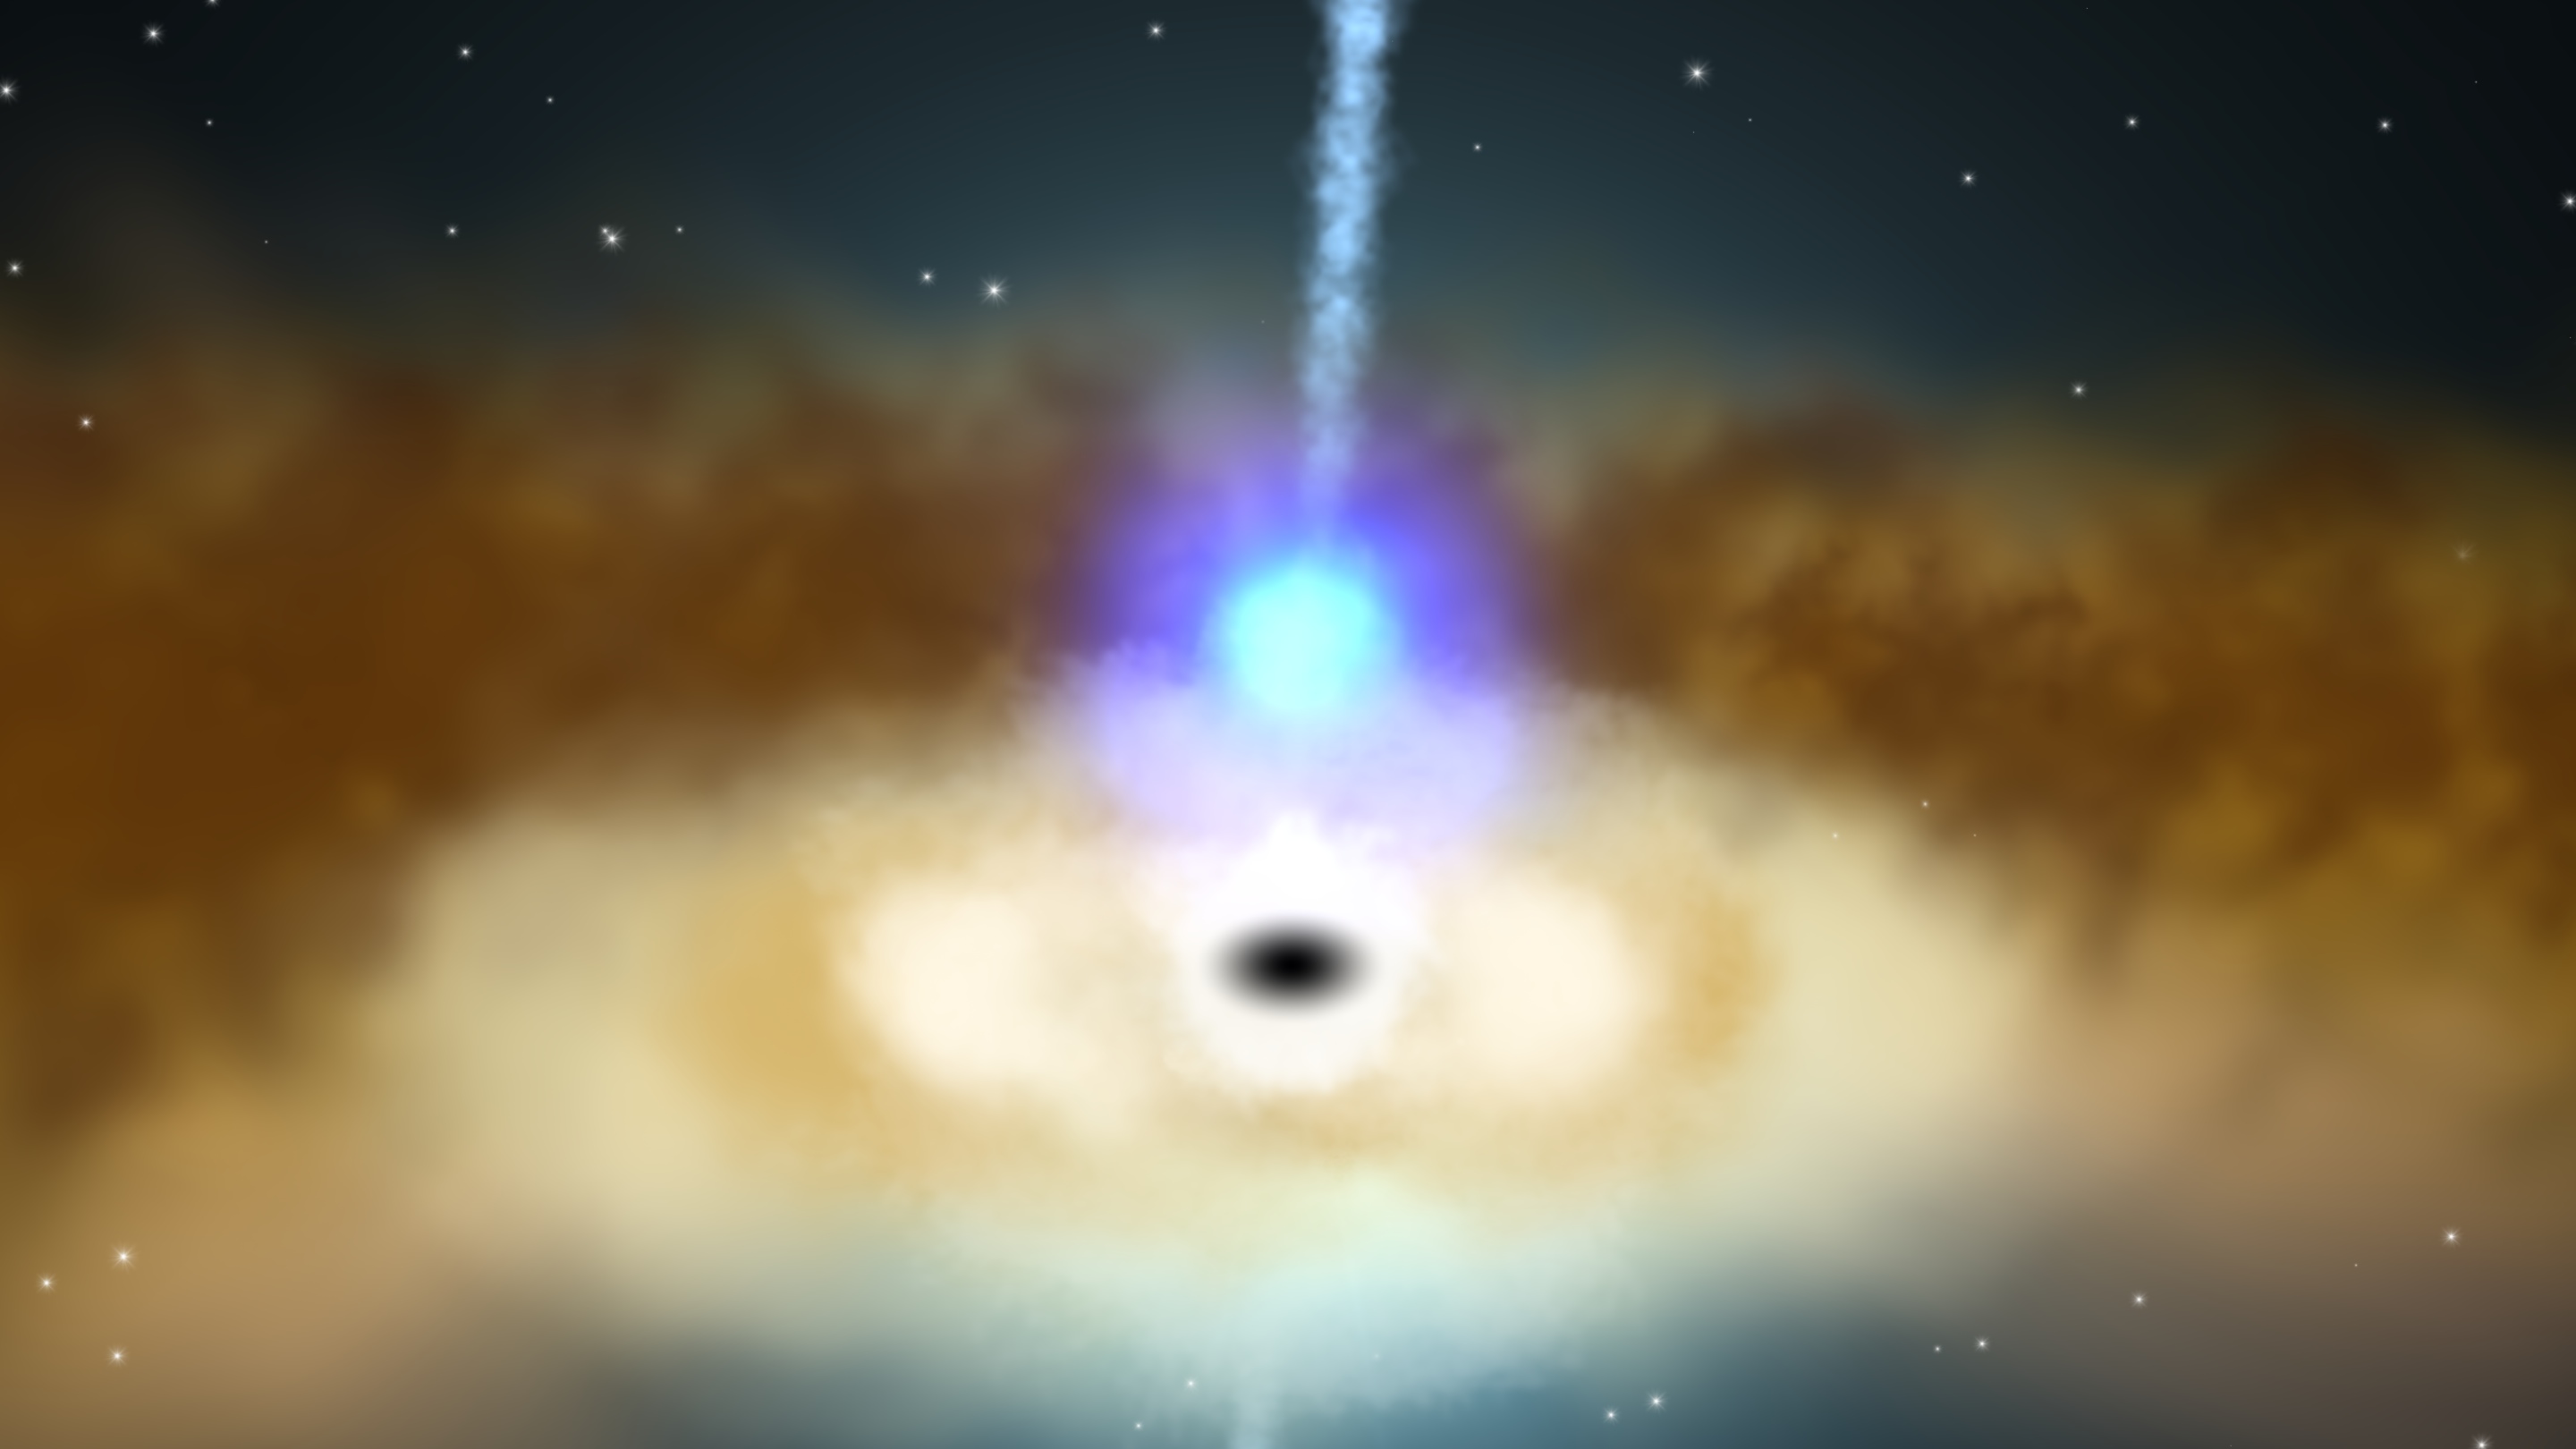 Astronomers using data from the European Space Agency's XMM-Newton satellite have found a long-sought X-ray signal from NGC 4151, a galaxy that contains a supermassive black hole. When the black hole's X-ray source flares, its accretion disk reflects the emission about half an hour later. The discovery promises a new way to unravel what's happening in the neighborhood of these powerful objects.For complete transcript, click here.